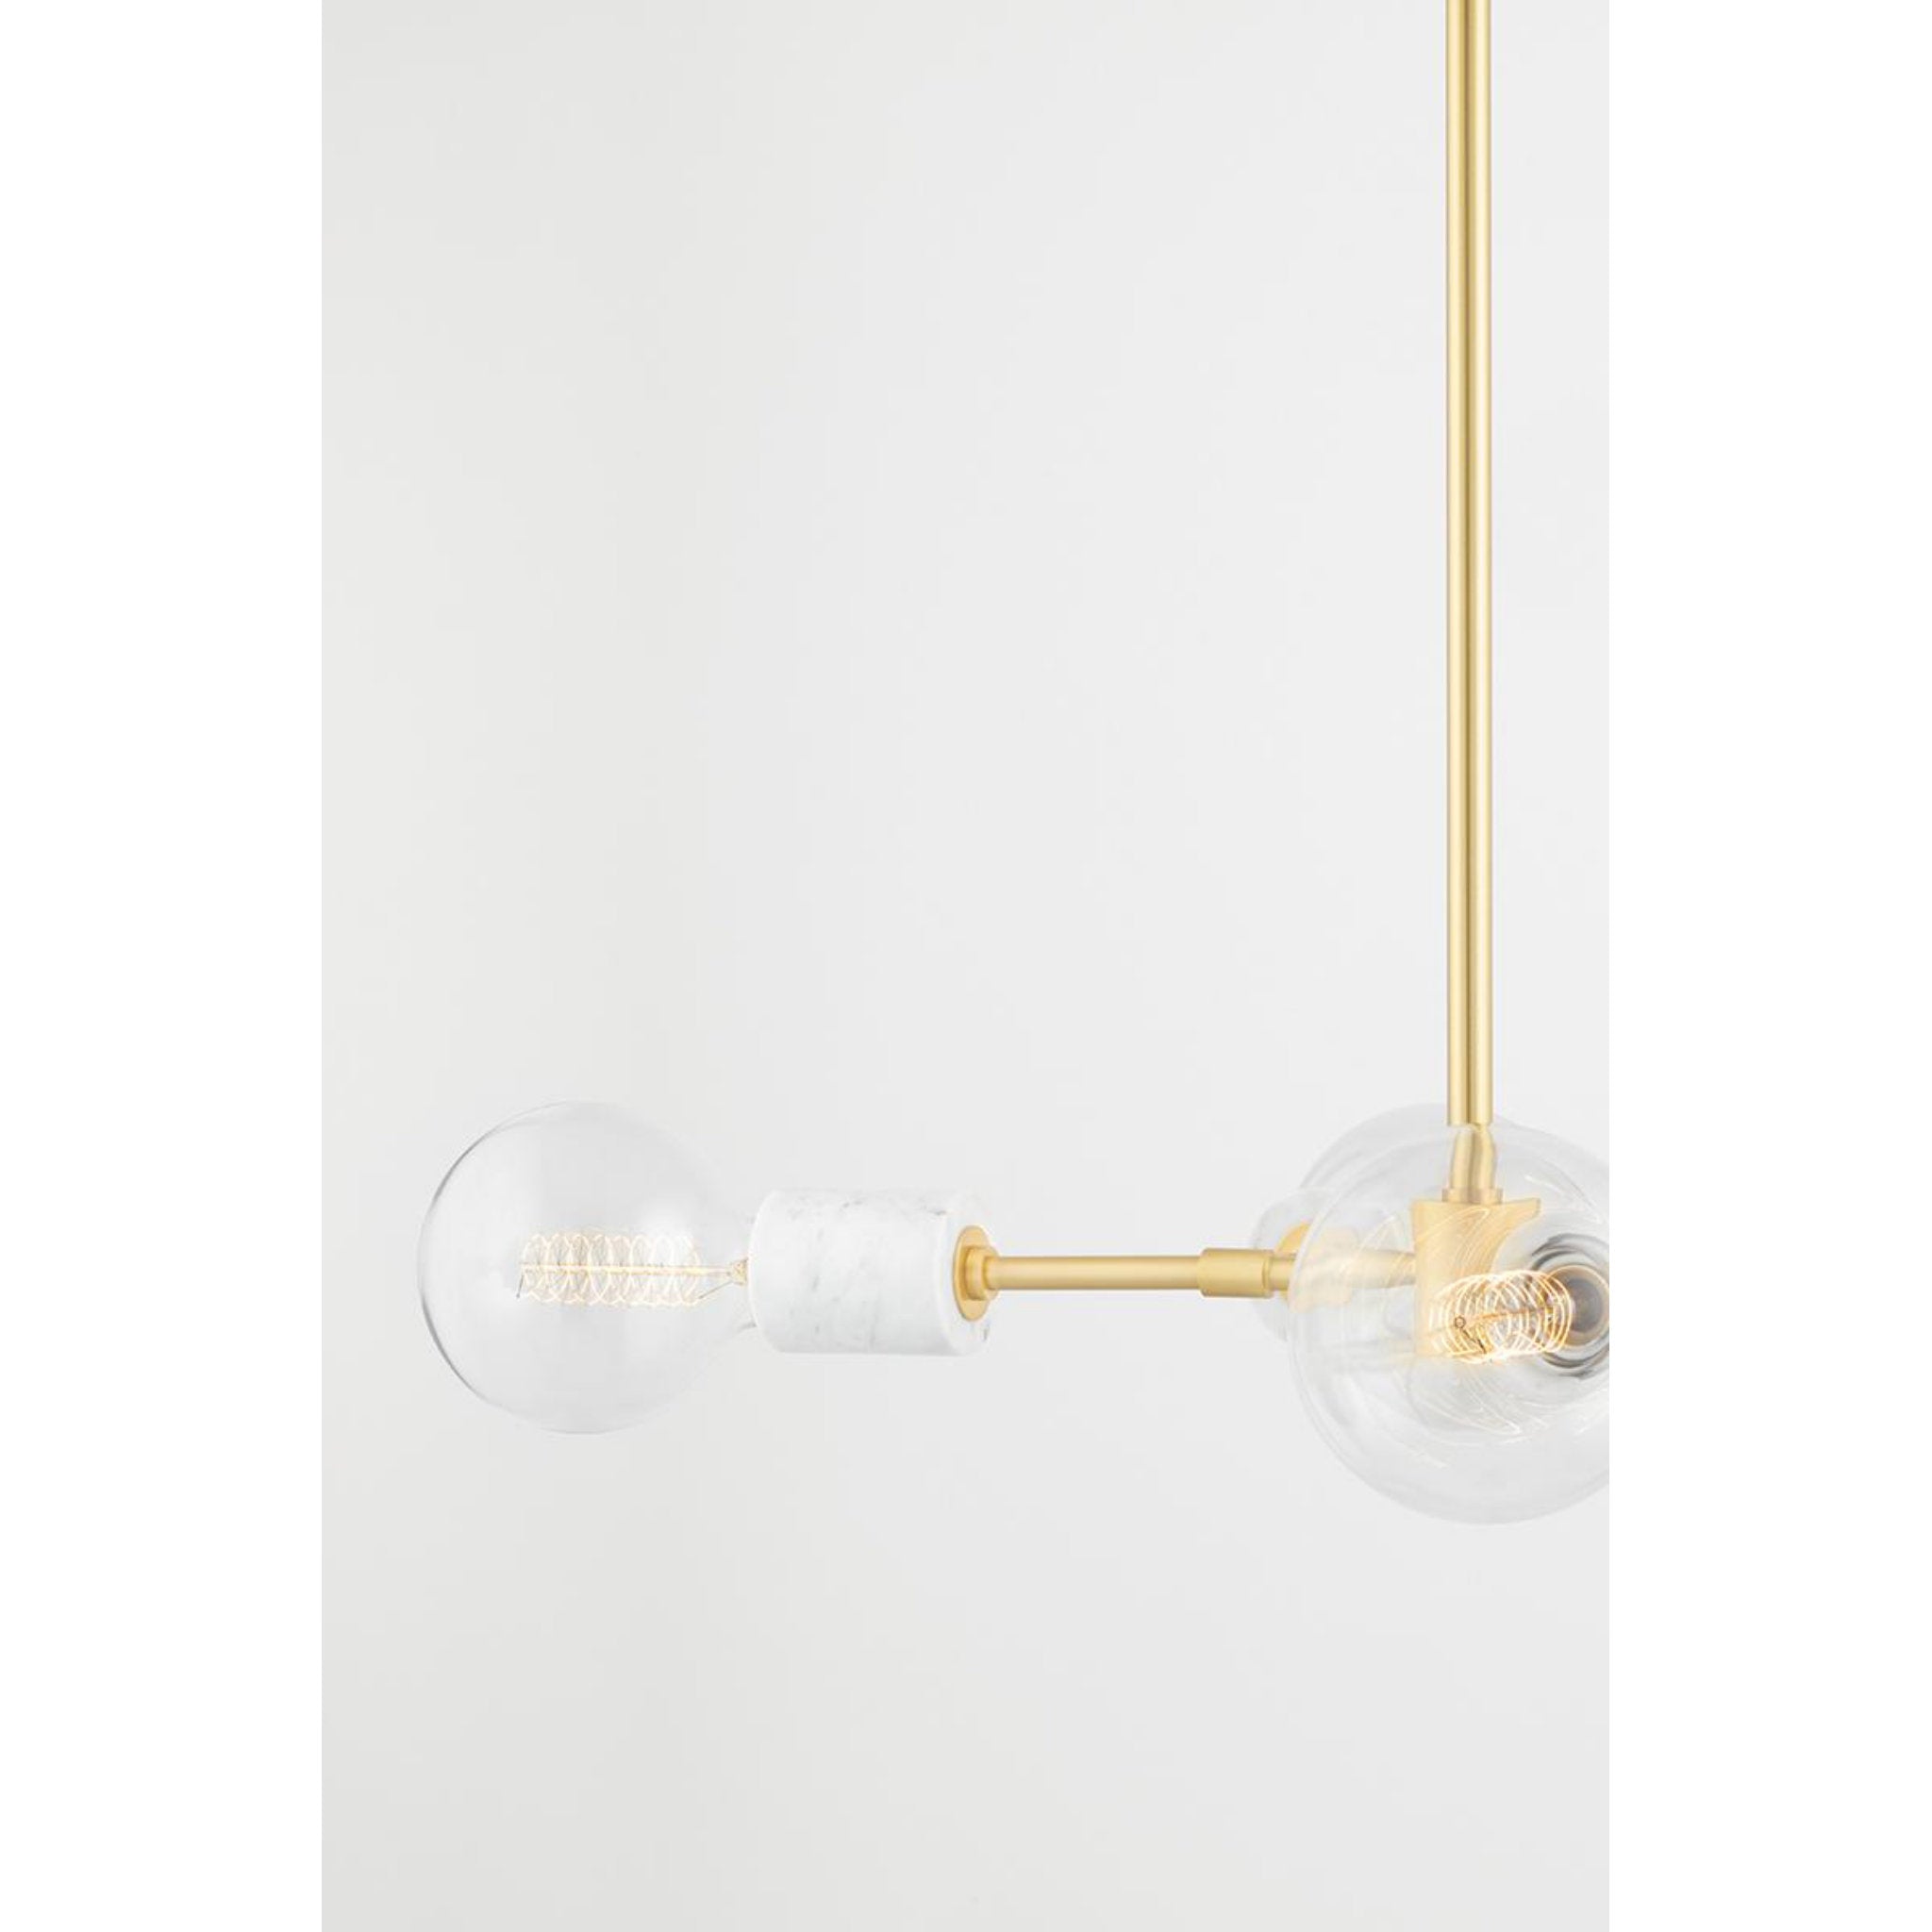 Asime 2-Light Wall Sconce in Polished Nickel